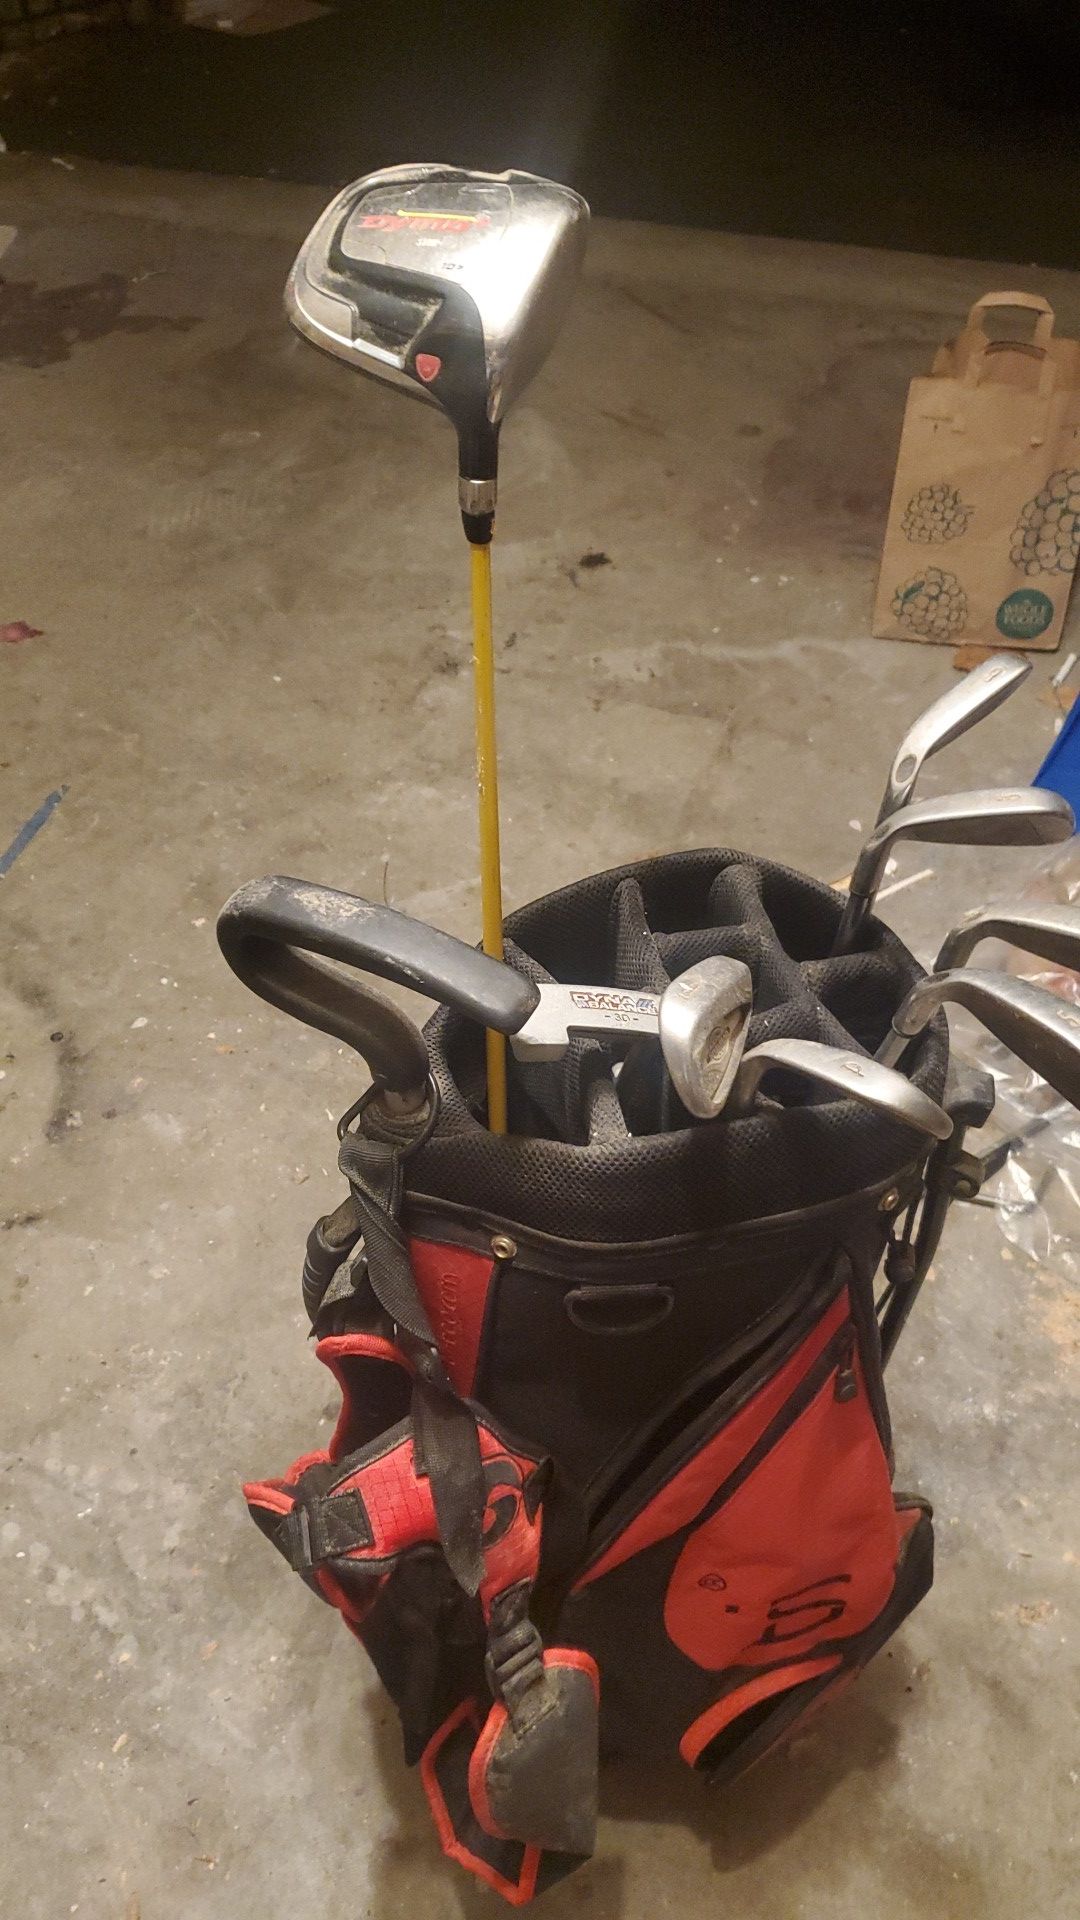 Callaway irons and Nike driver